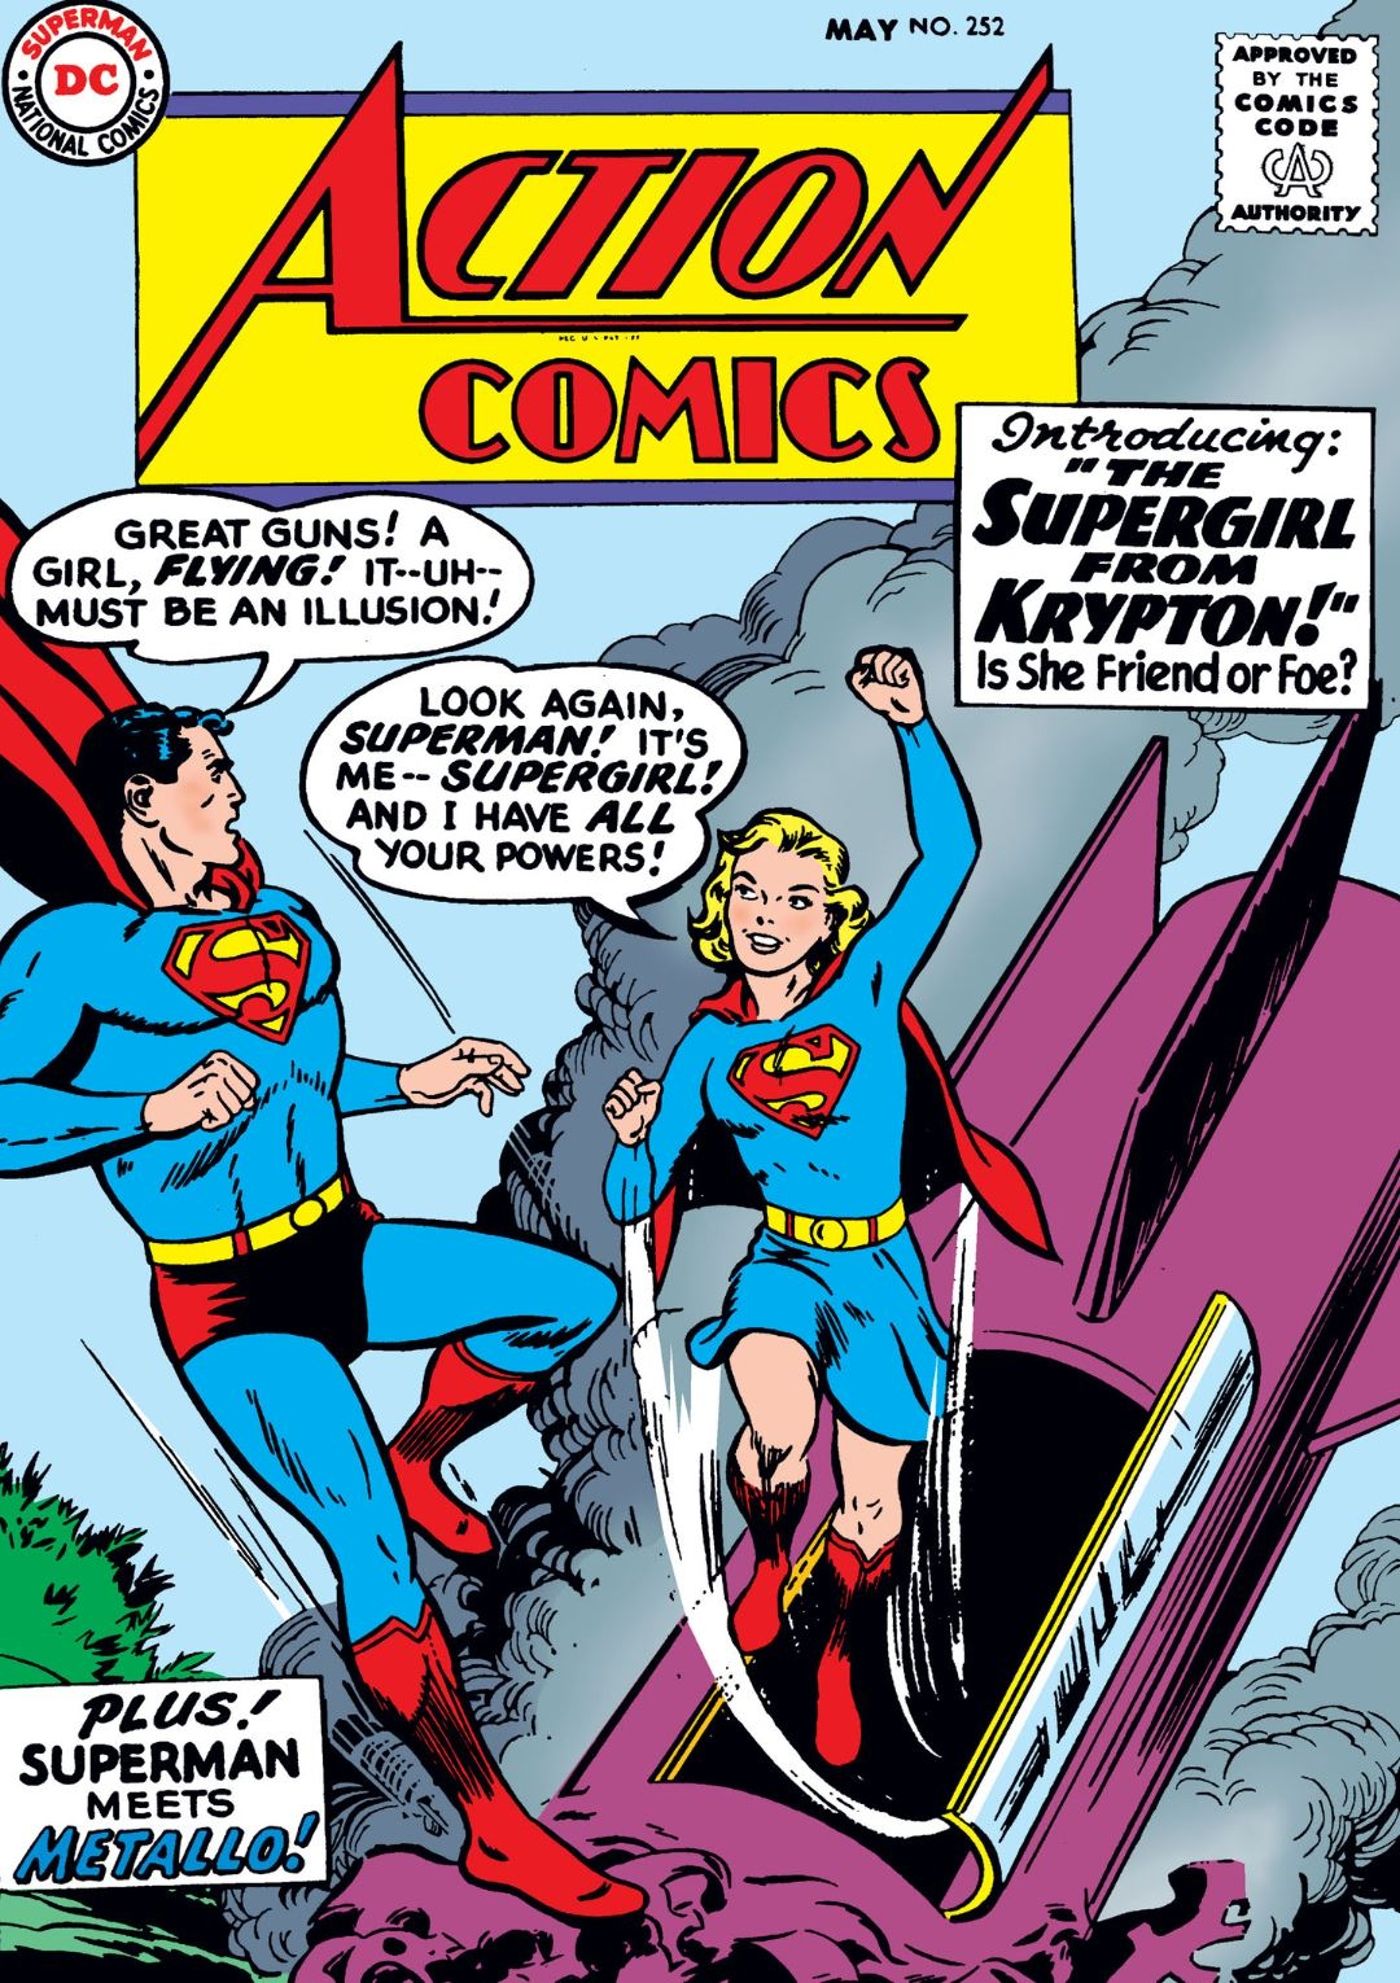 10 Most Iconic Superman Covers from the Man of Steel’s History